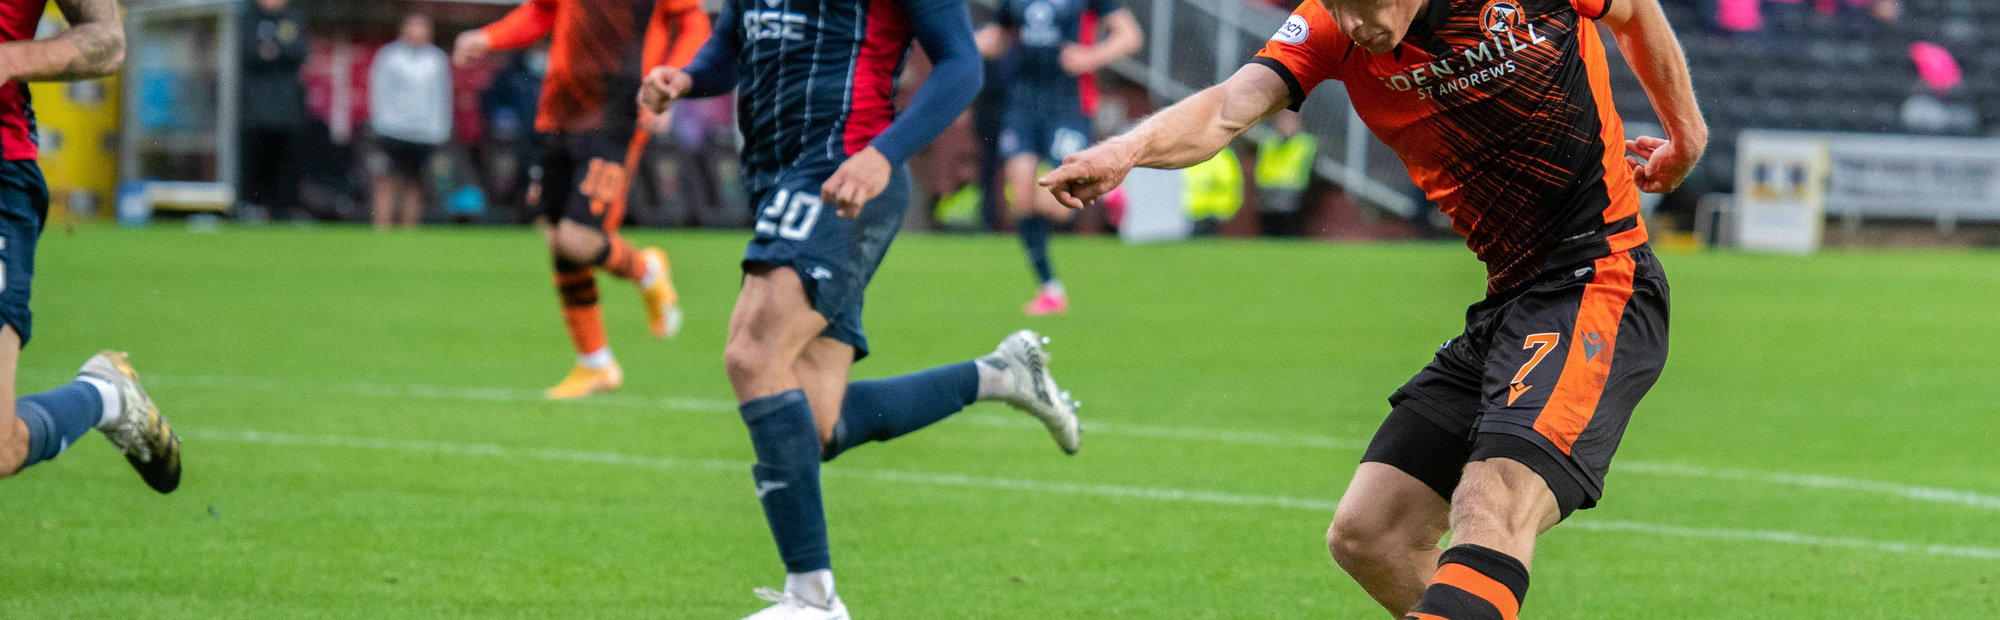 MATCH PREVIEW | ROSS COUNTY (H)